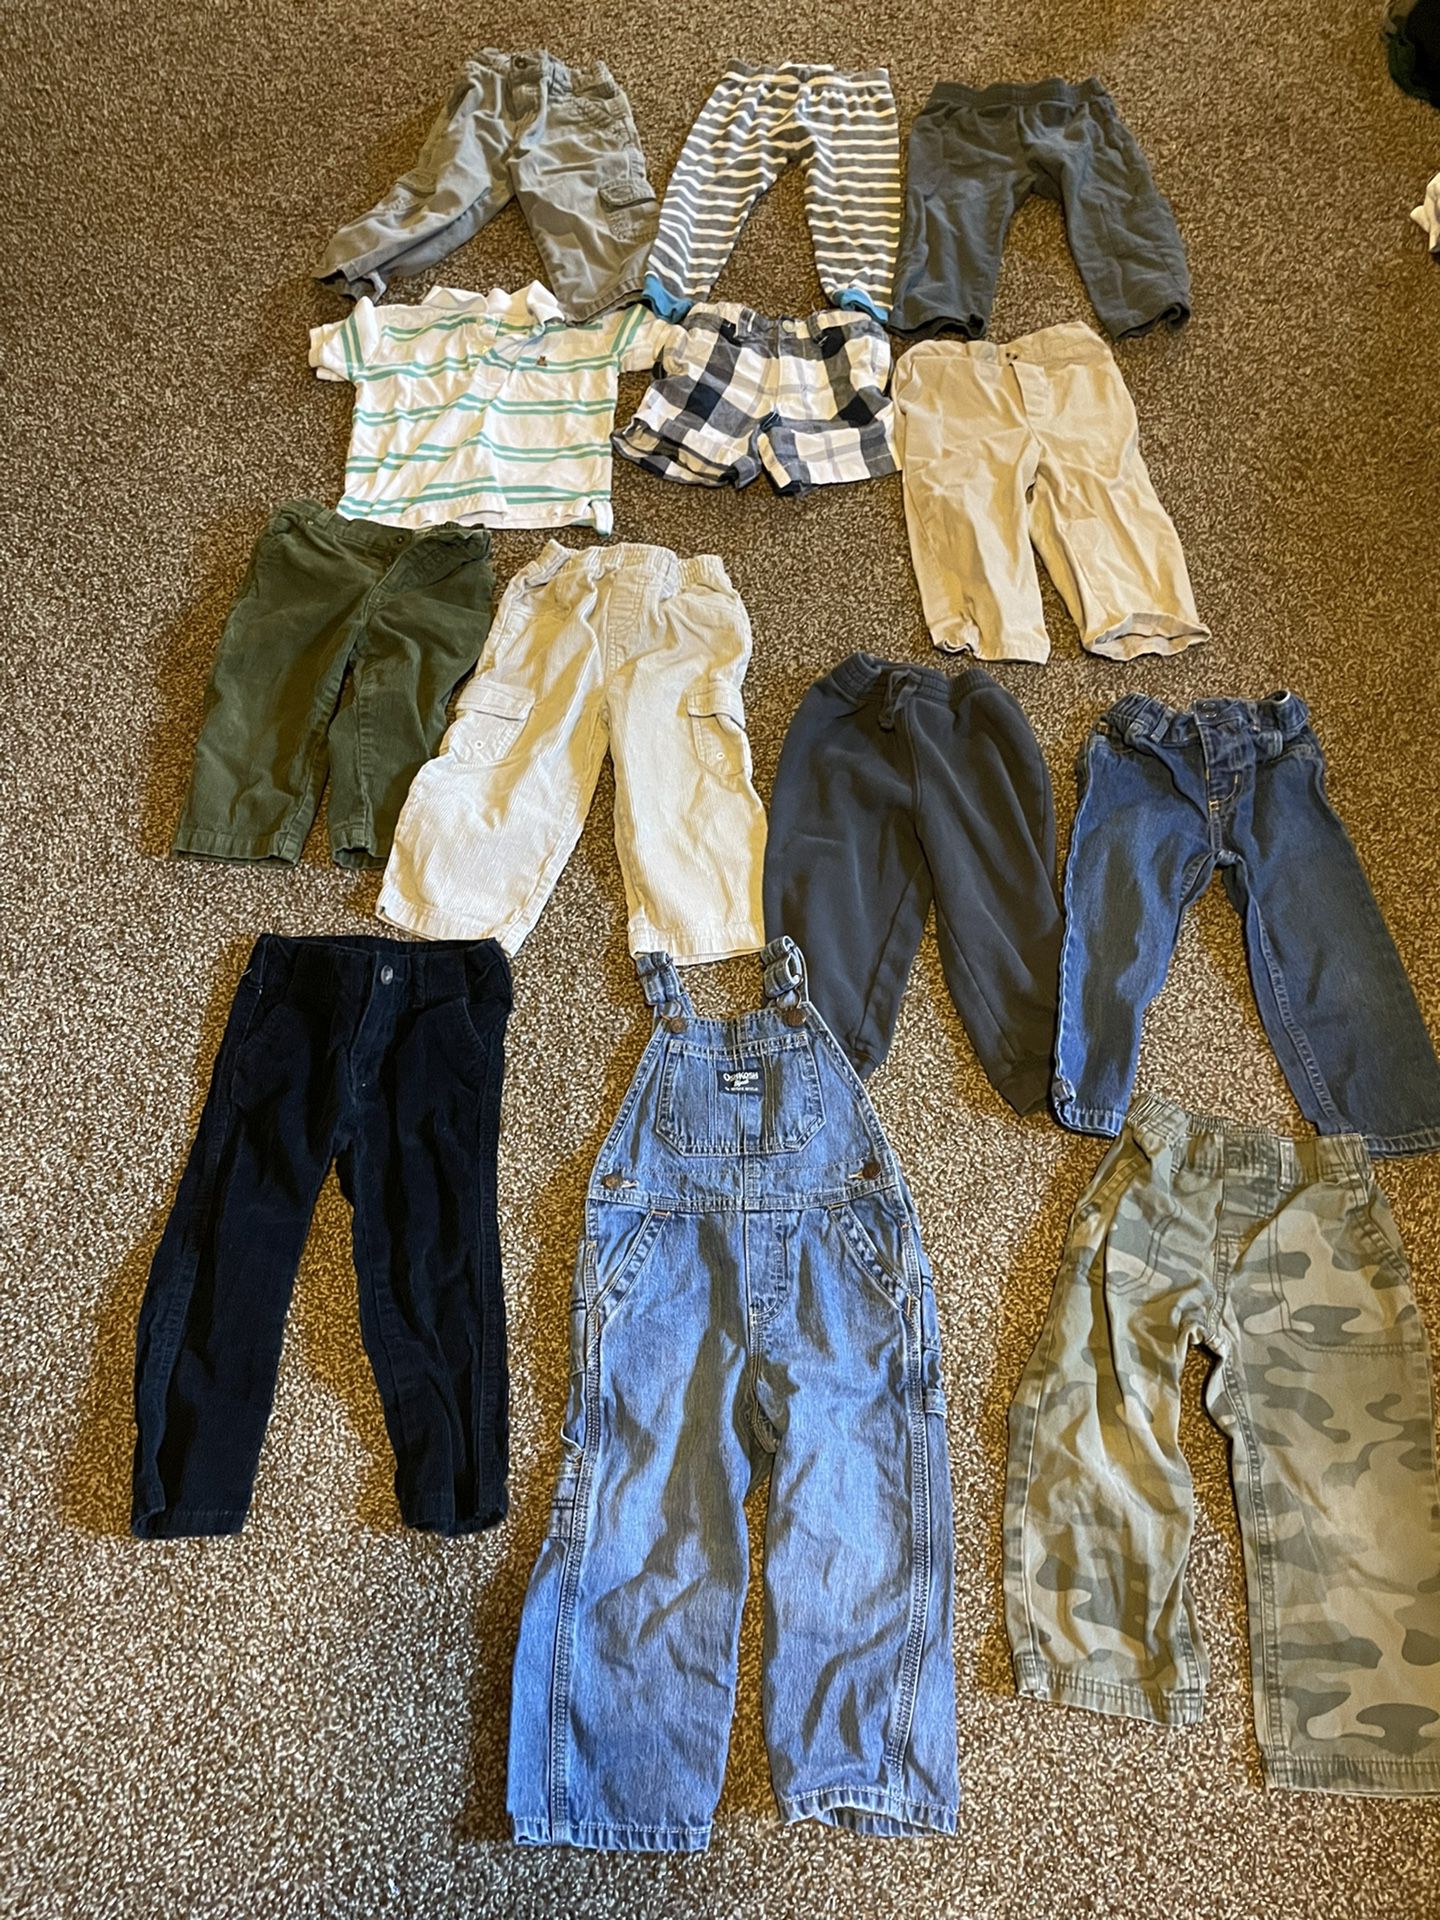 2t/24 Months Clothes  Washed And Gently Used  All For $15